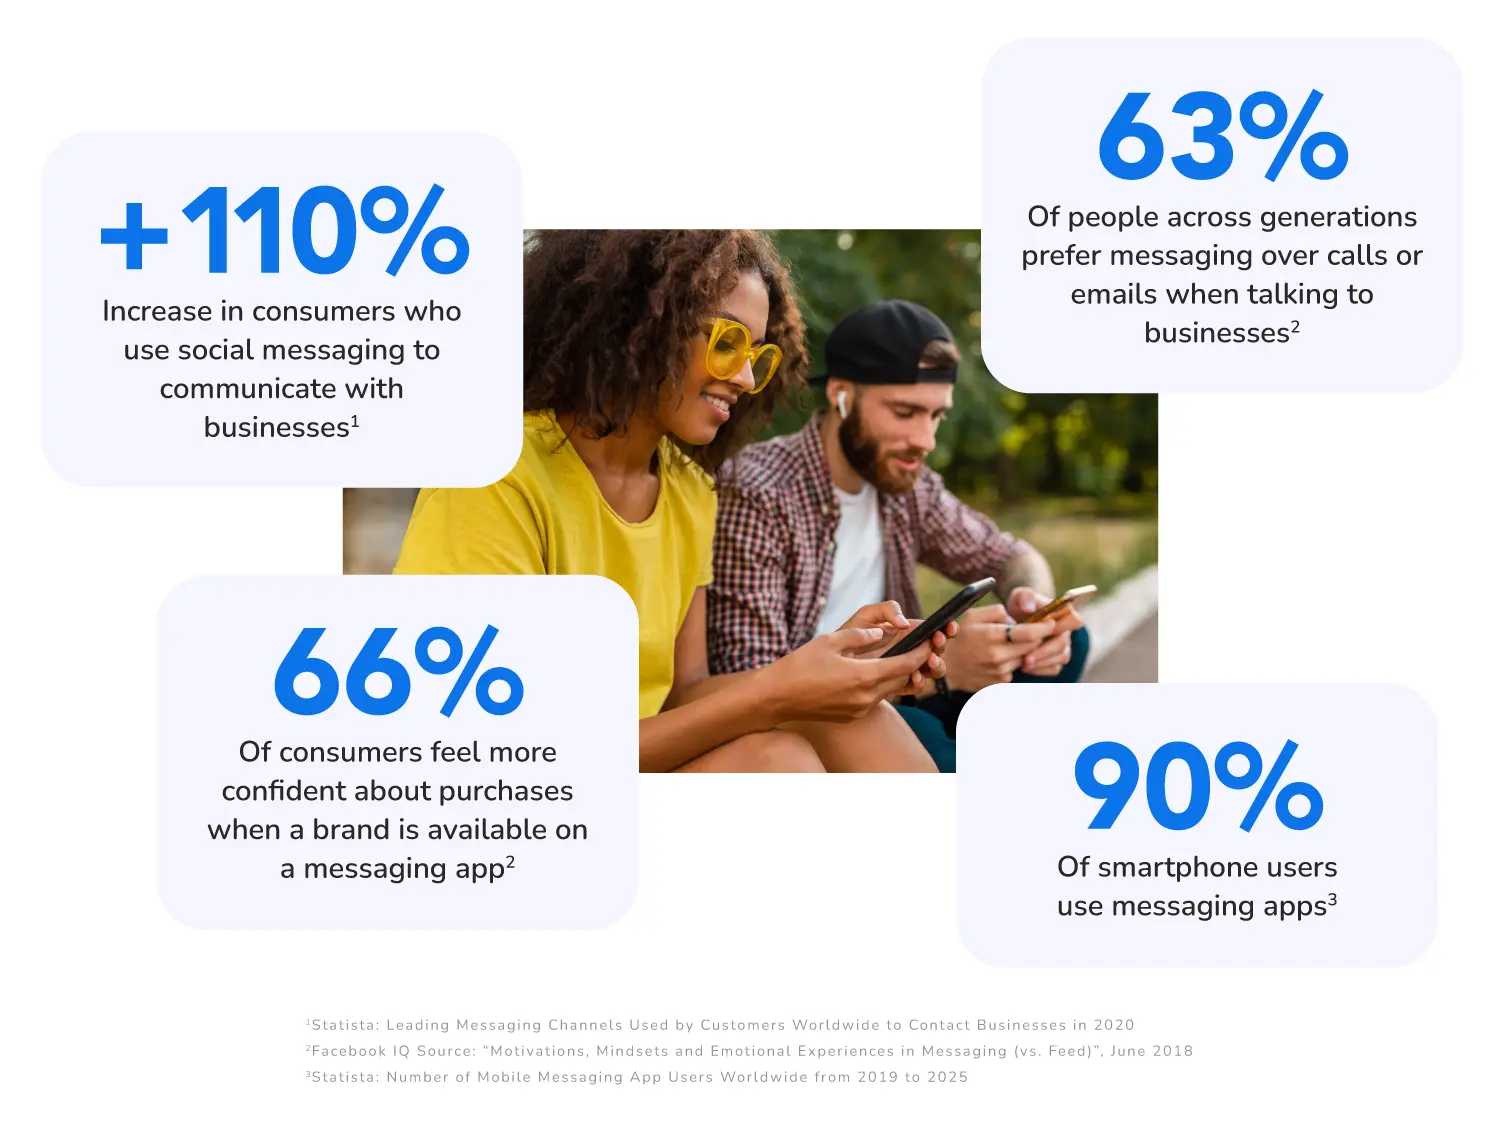 Businesses embracing messaging channels and apps as part of their communication strategy